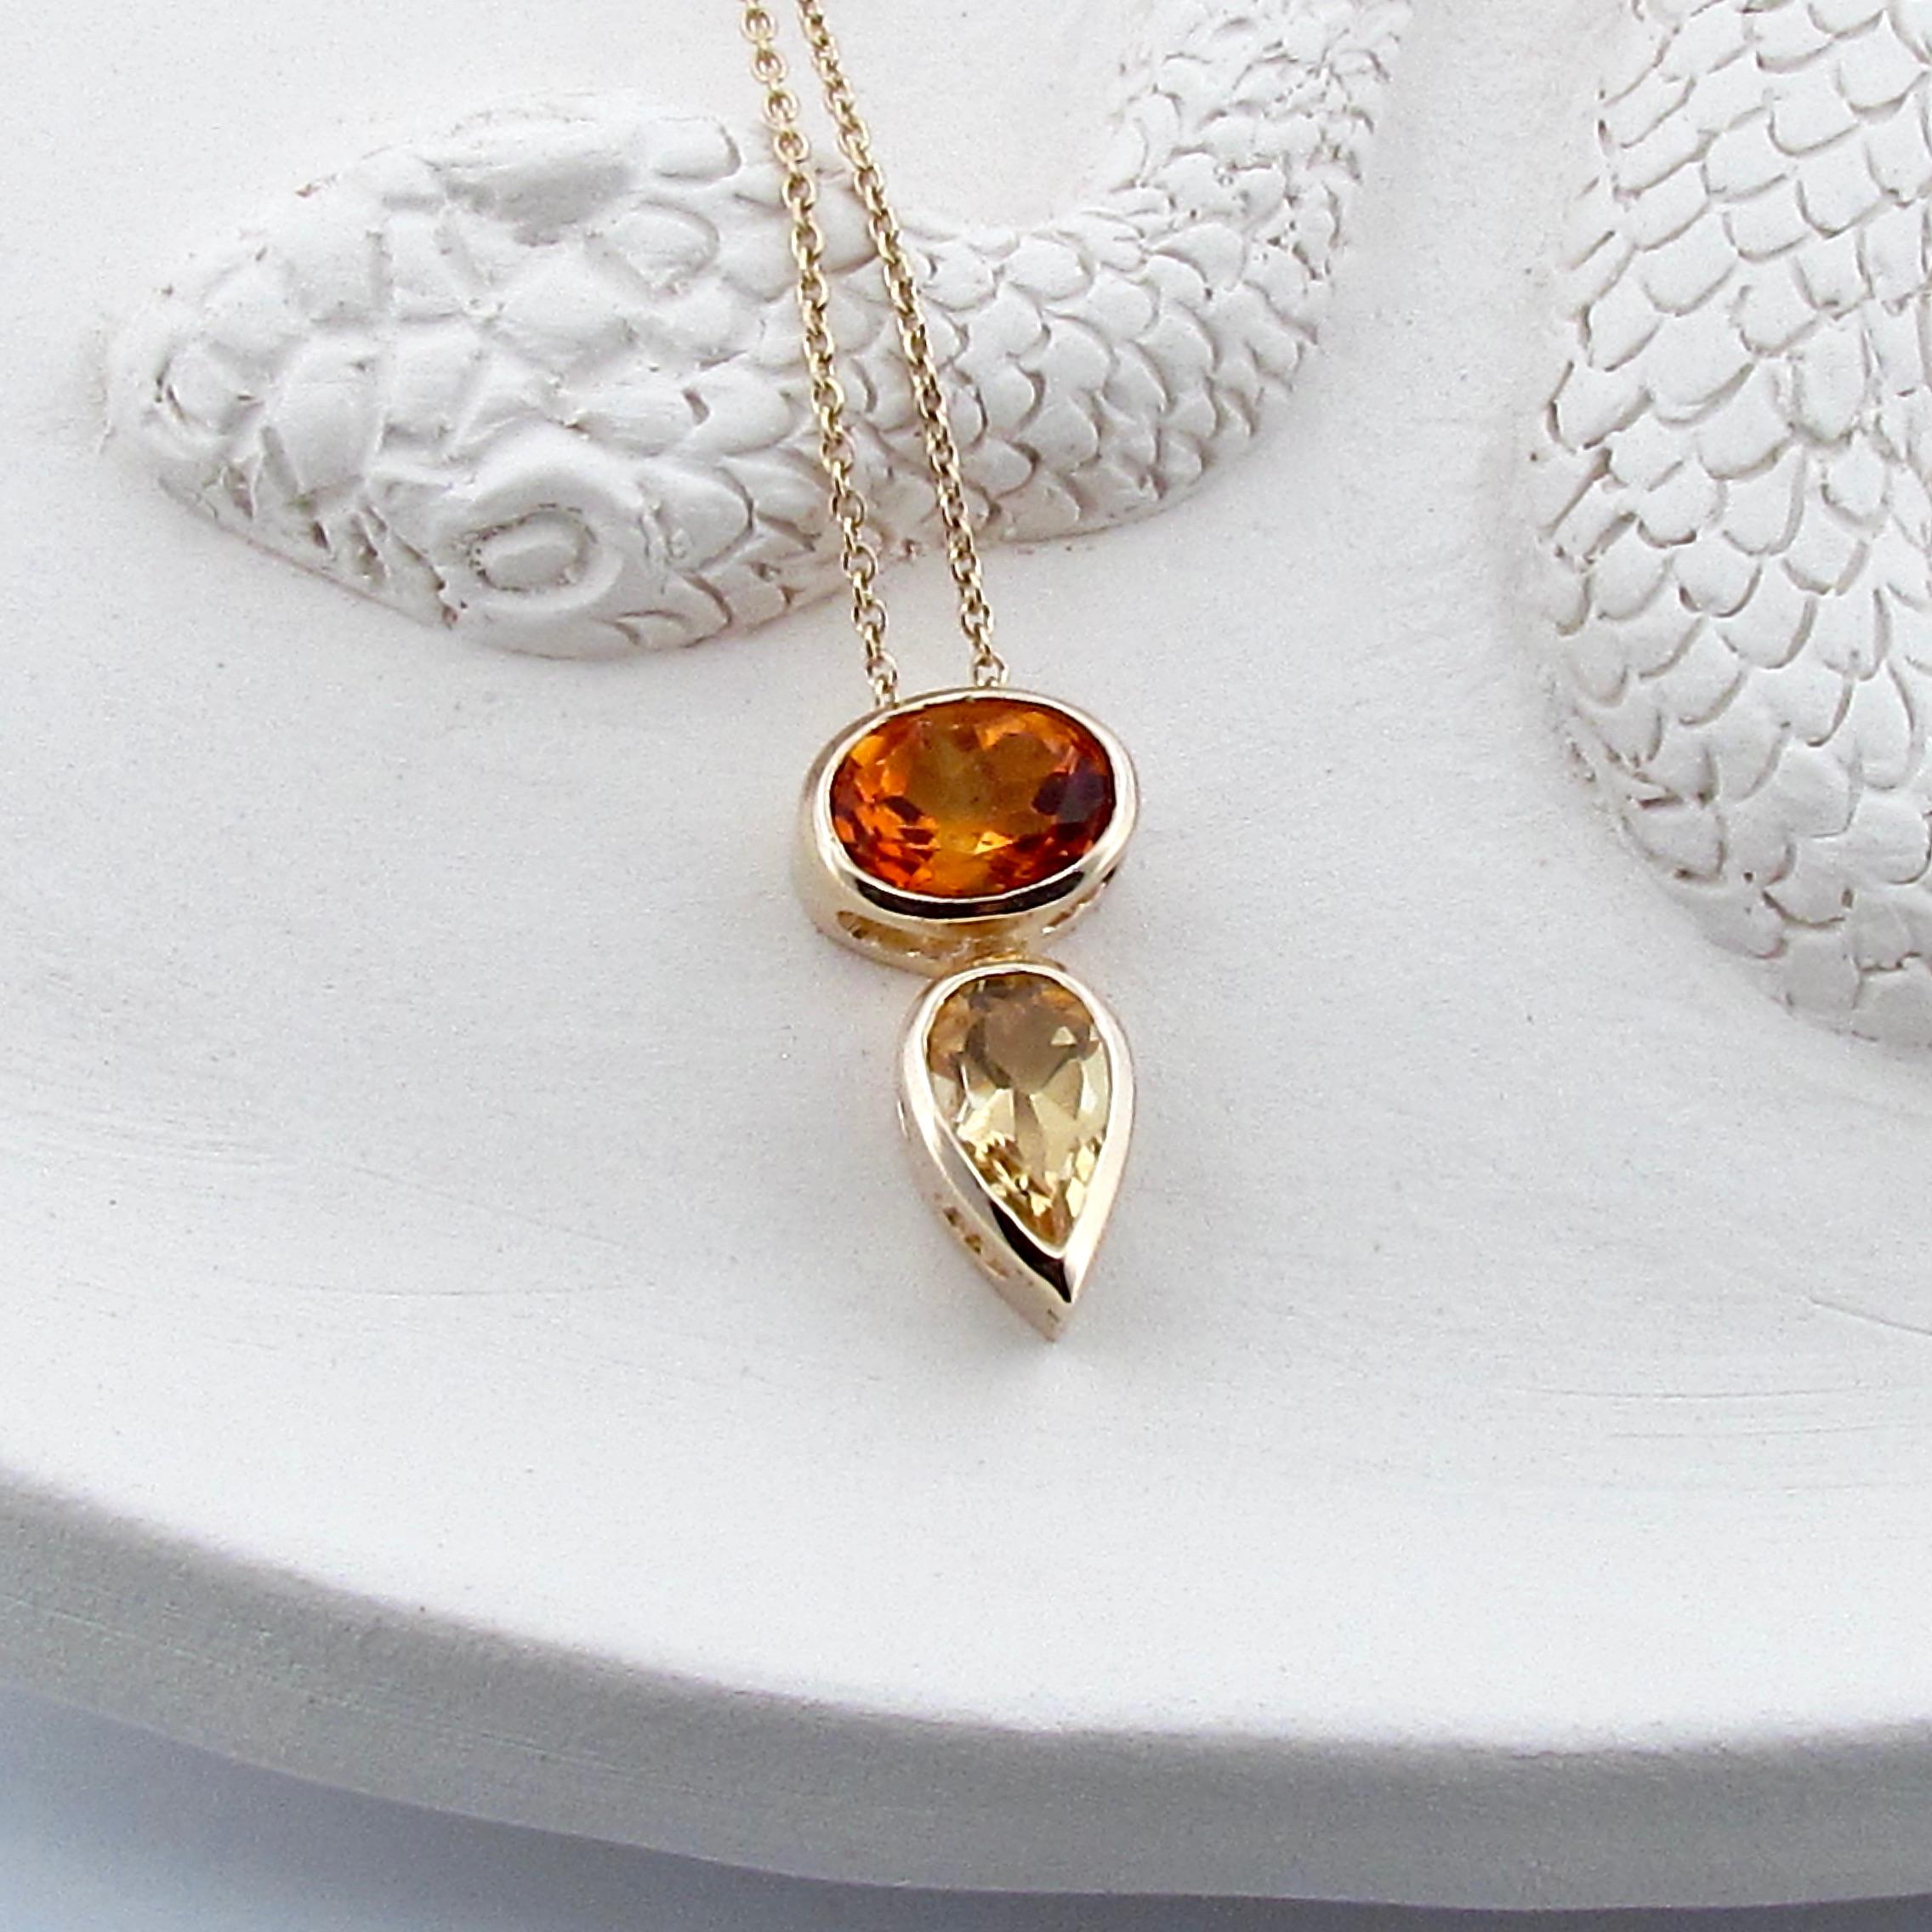 This 9ct solid Gold Balance pendant is set with a rare deep orange faceted Madeira Citrine and a pear shaped faceted bright yellow Citrine, it slides beautifully on a solid 9ct yellow gold 50cm/20inch delicate cable chain.   The dark and bright hues